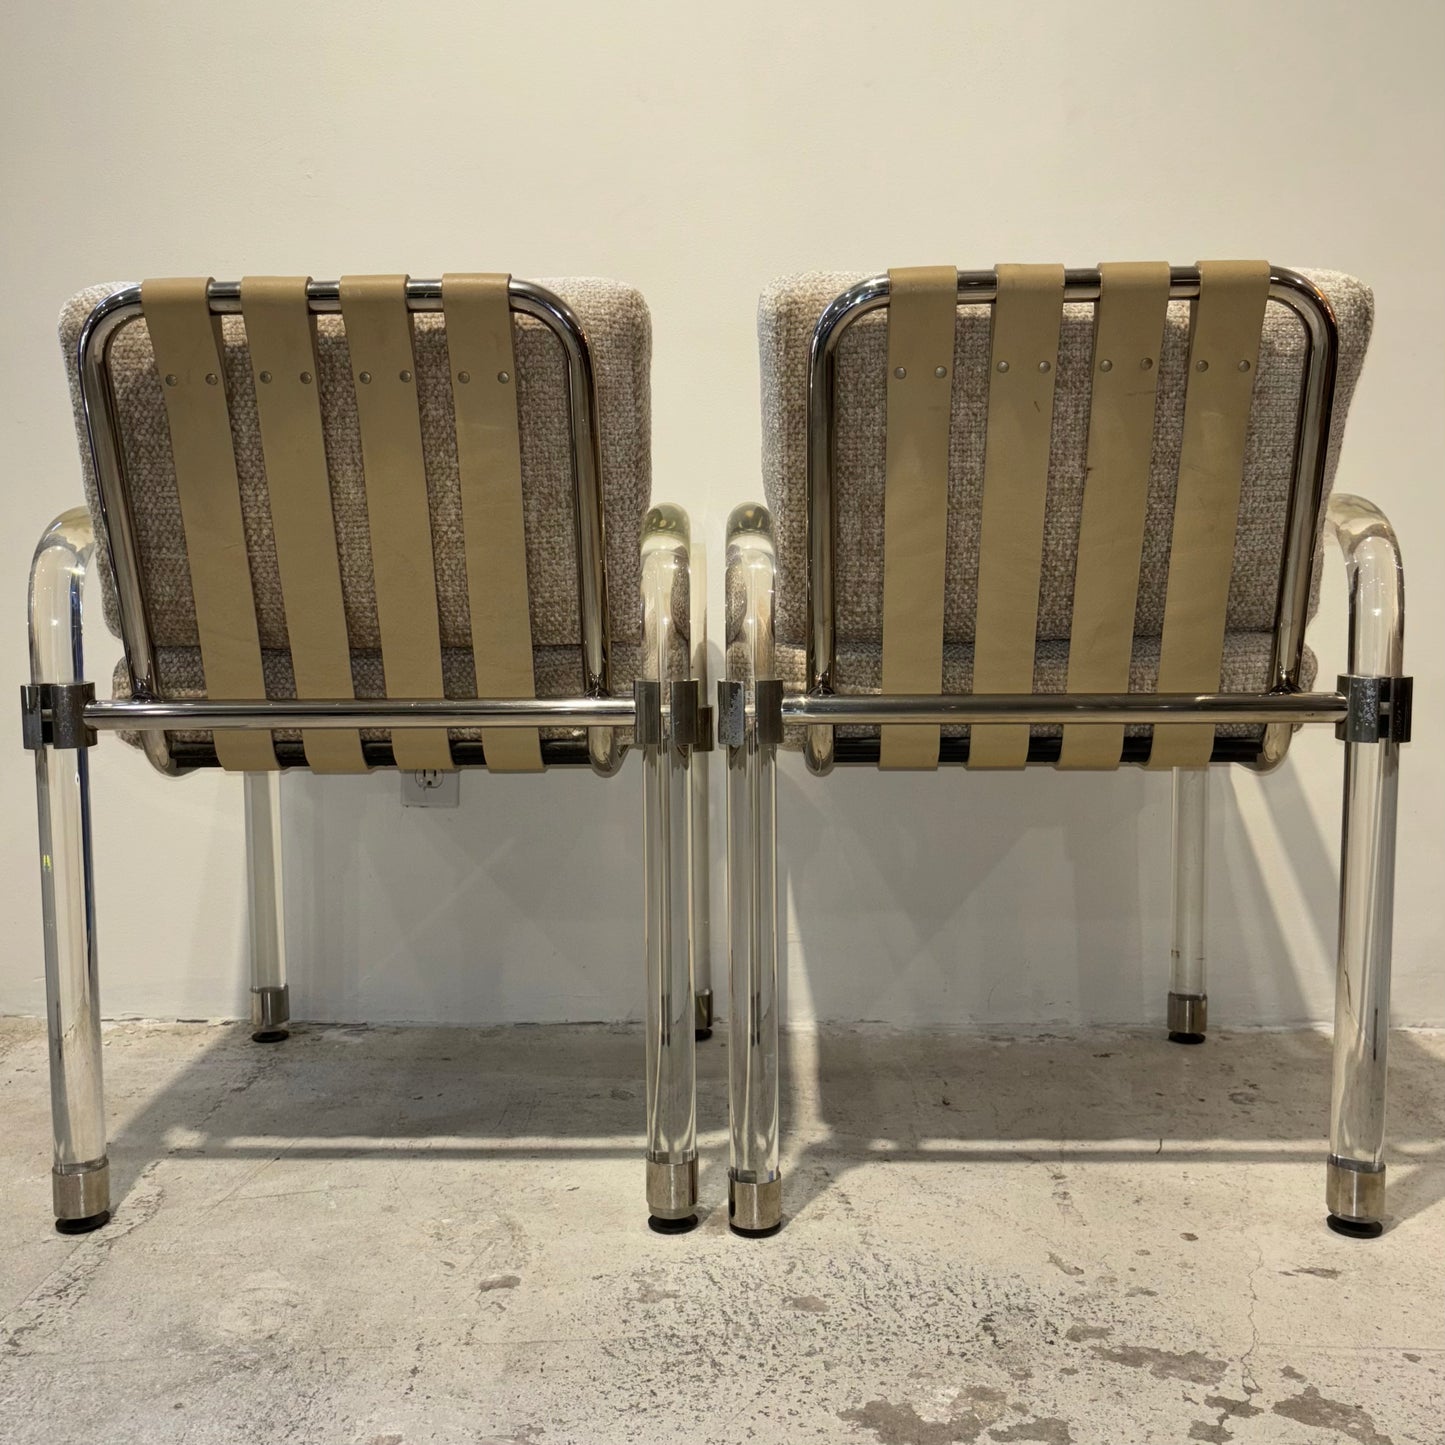 Jeff Messerschmidt Lucite & Leather Chairs